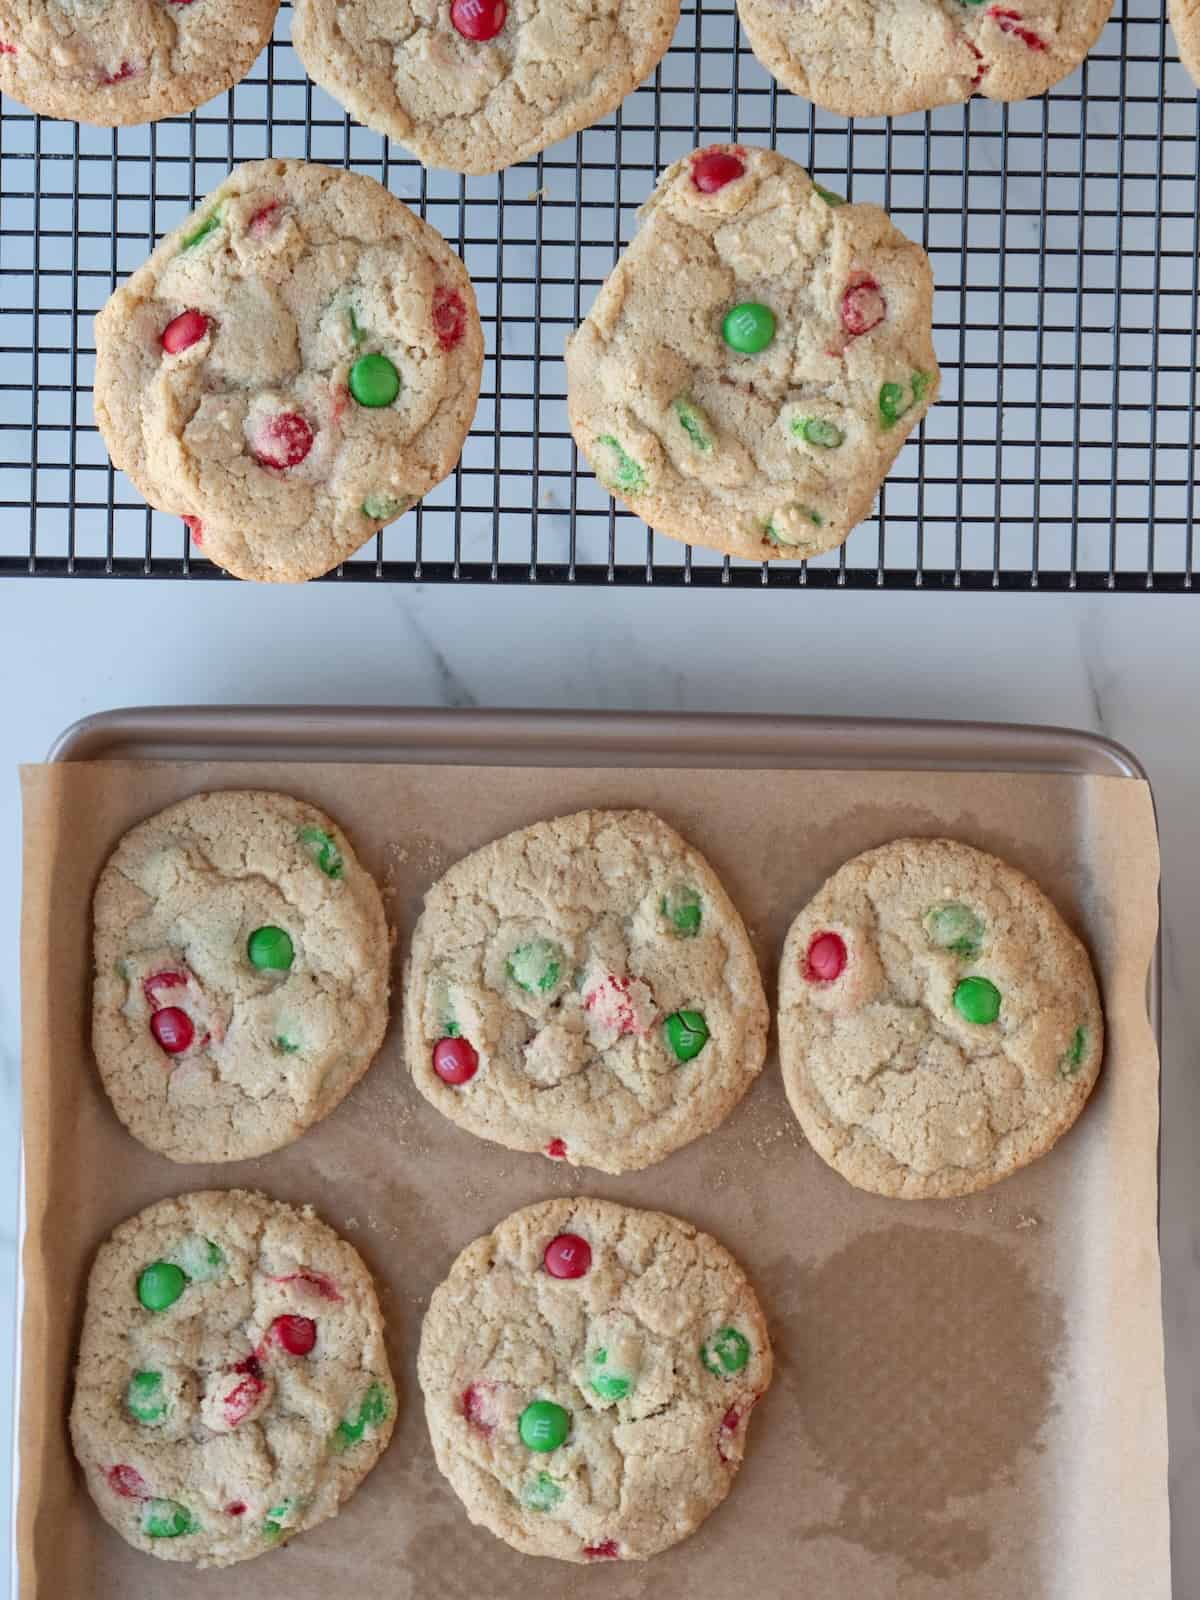 A wire rack alongside a parchment lined baking sheet, both with Christmas M&M cookies.